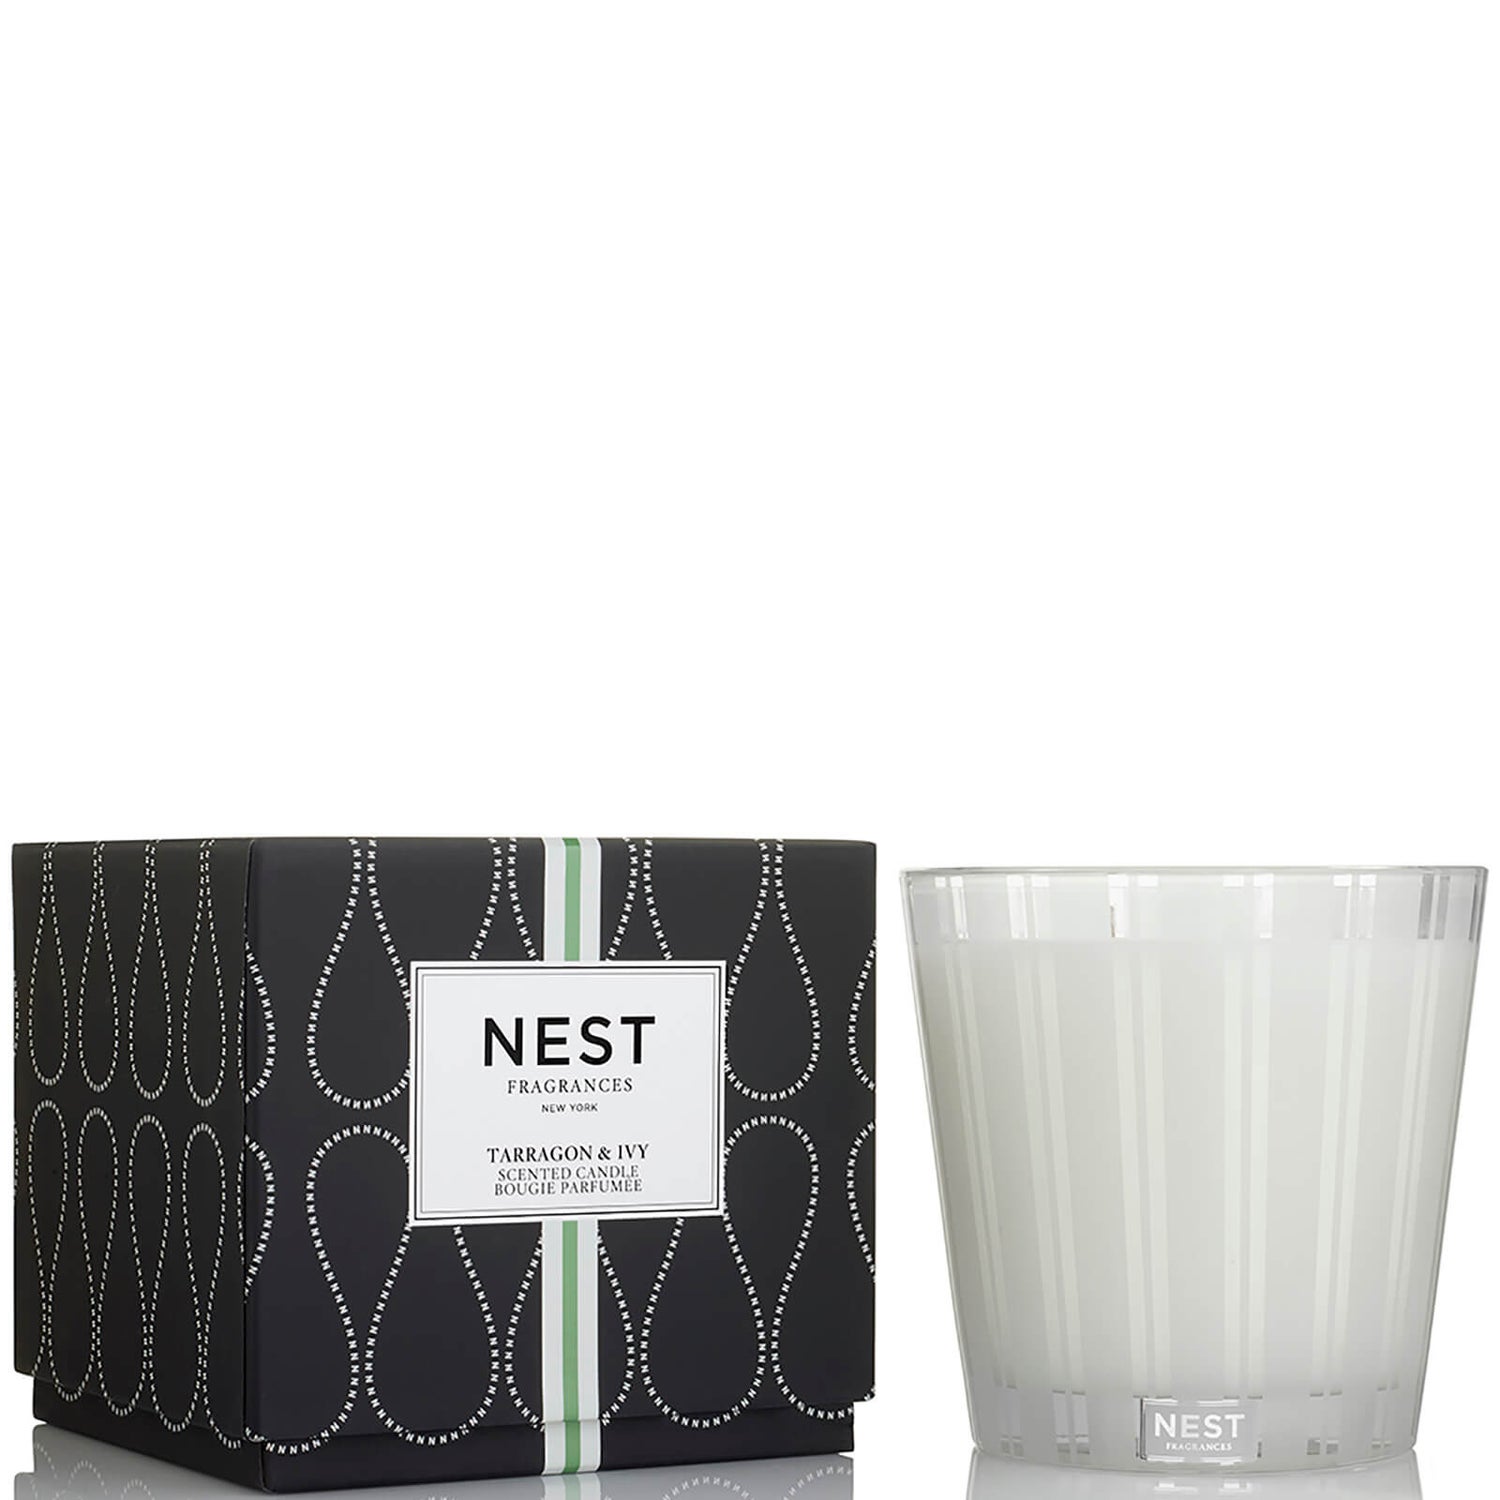 NEST Fragrances Tarragon and Ivy 3-Wick Candle